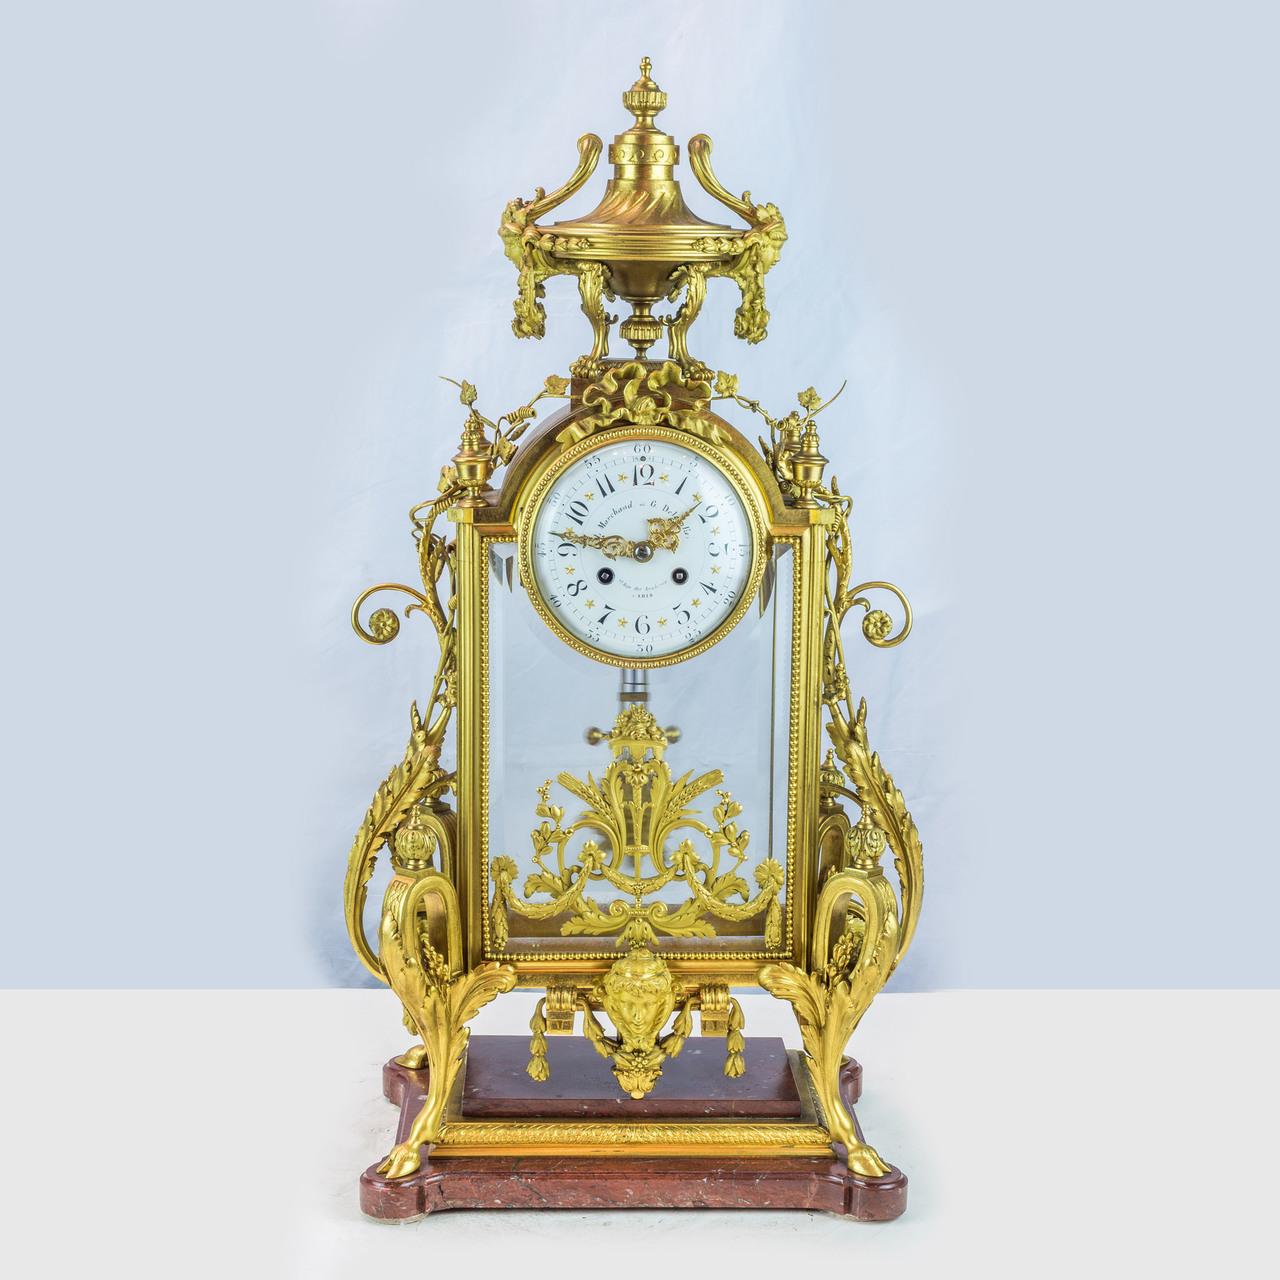 An exquisite 19th century Napoleon III ormolu and rouge griotte marble clock set attributed to Ferdinand Barbedienne. 
Three-piece set comprising a clock and a pair of seven-light candelabra; the clock surmounted by an urn and draped with scrolling